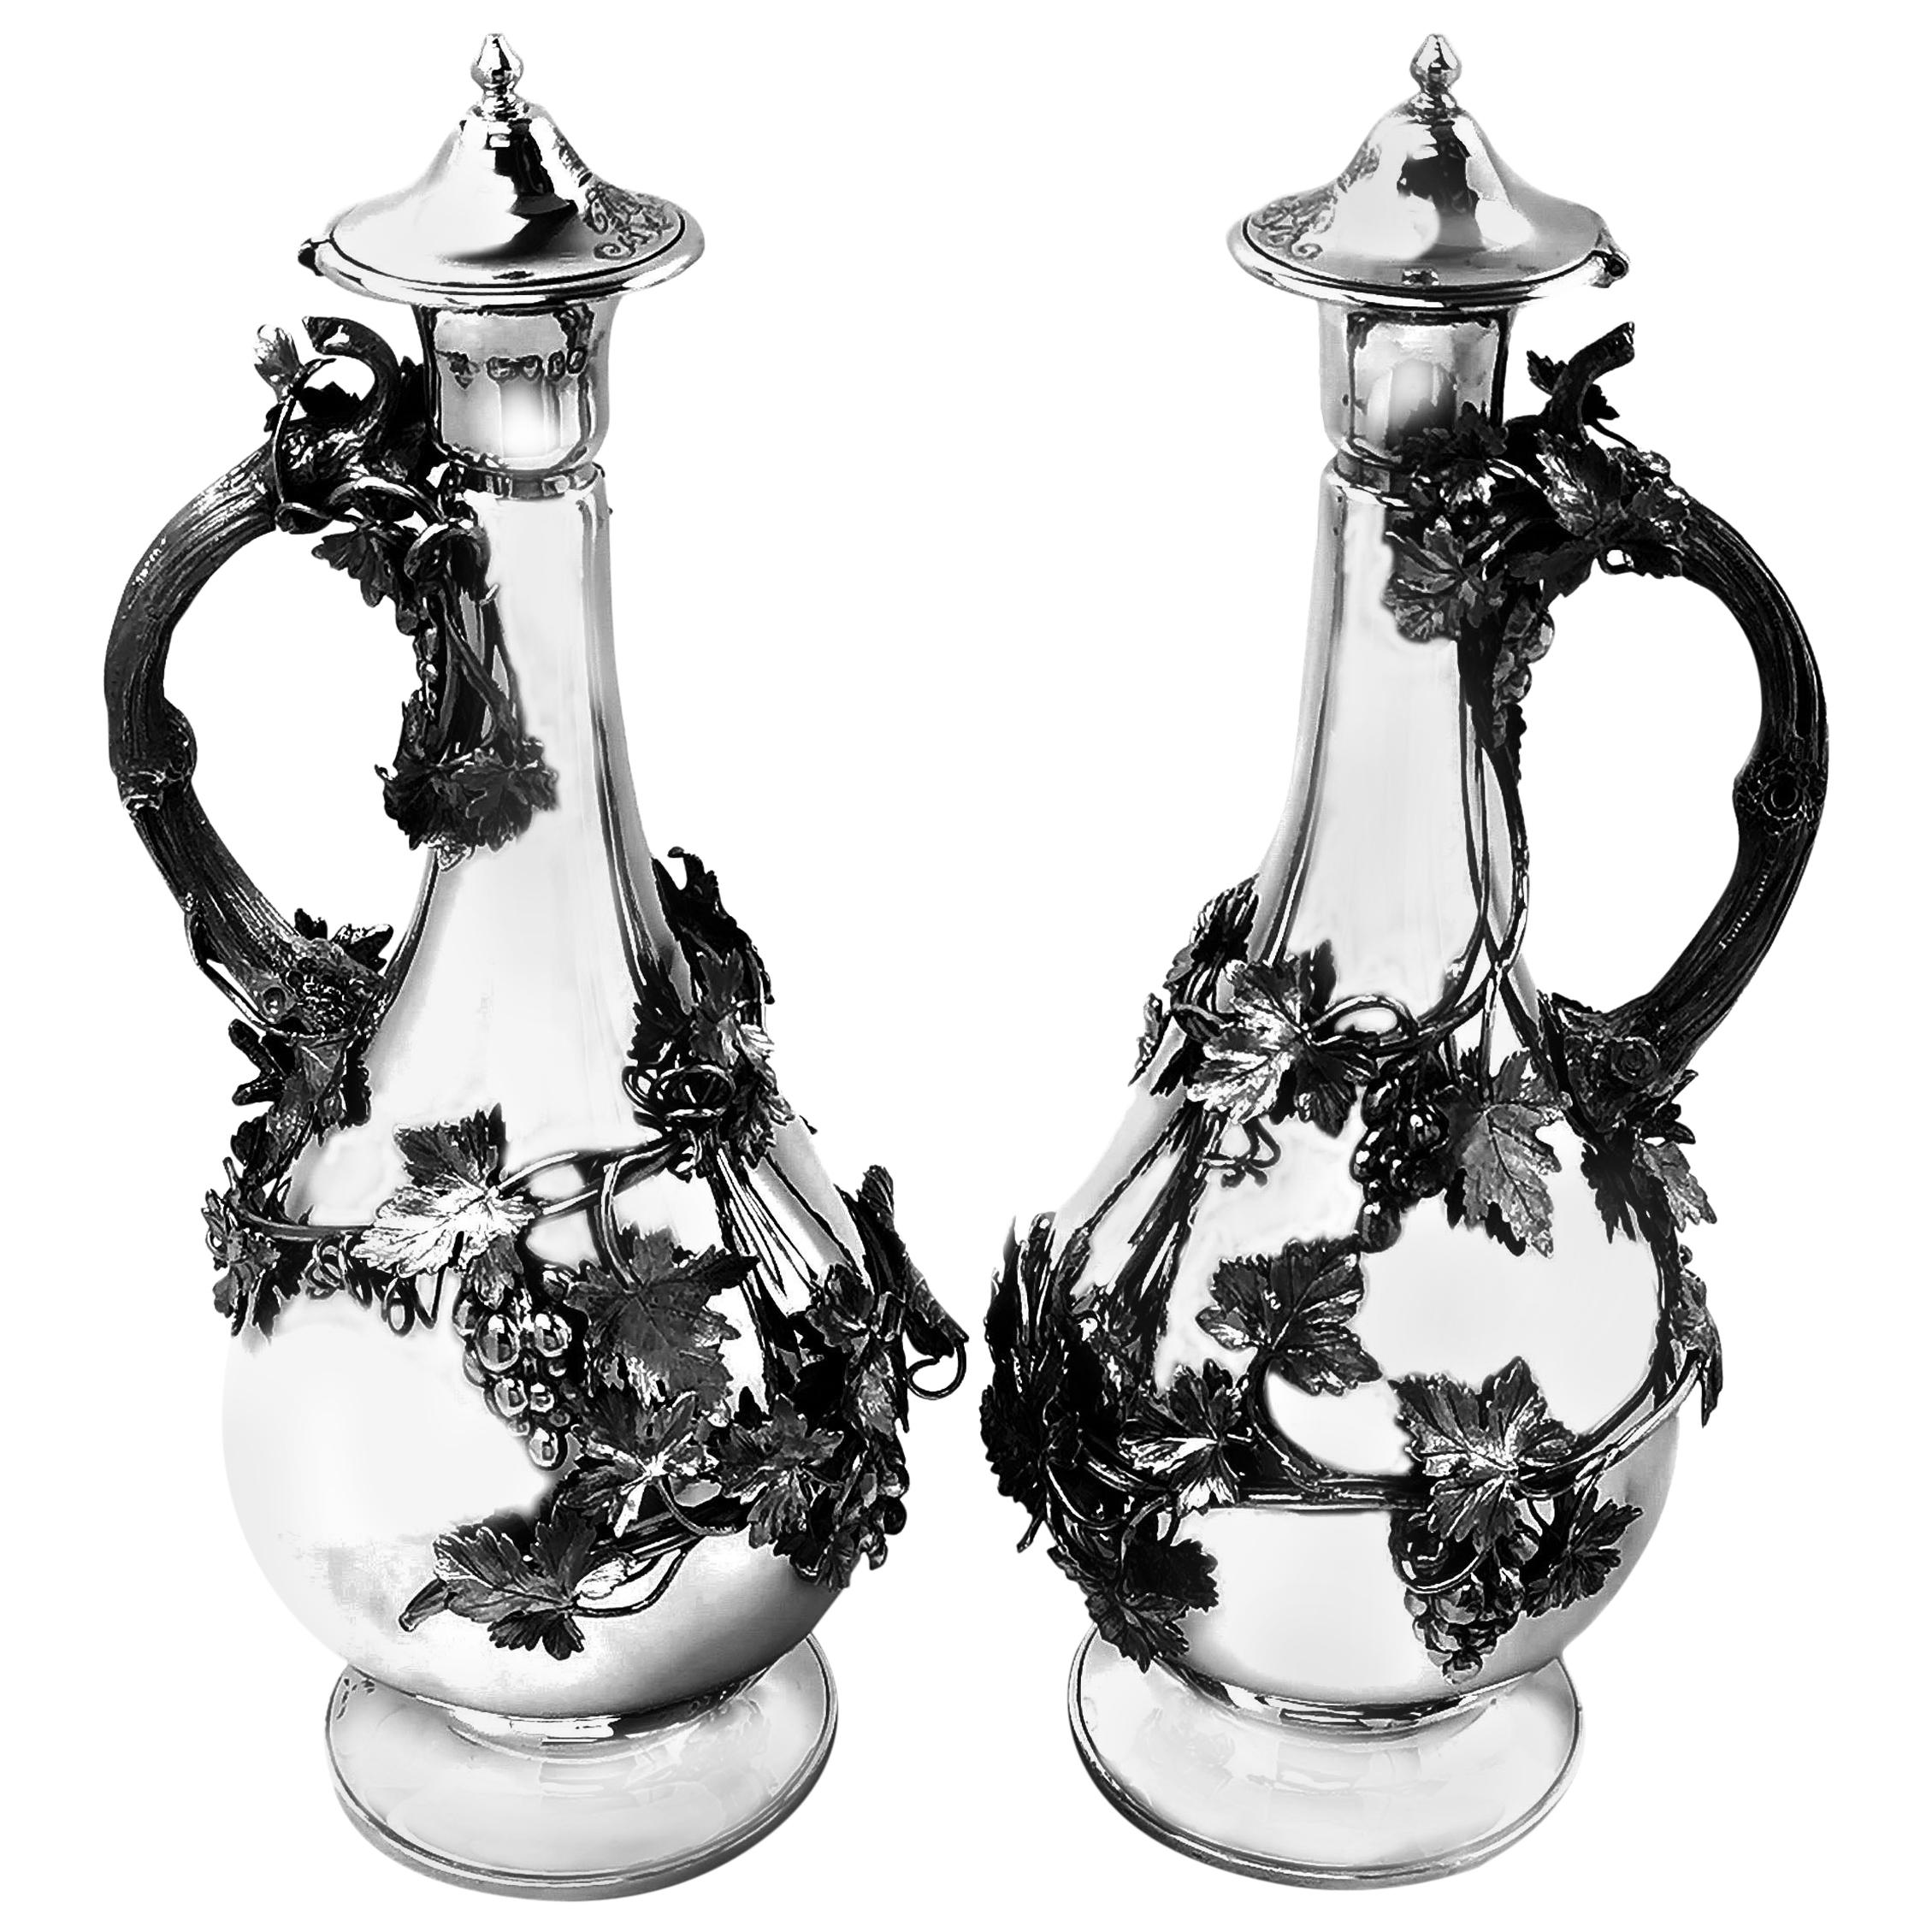 Pair of Antique Victorian Sterling Silver Claret Jugs Ewers Wine Decanters 1860